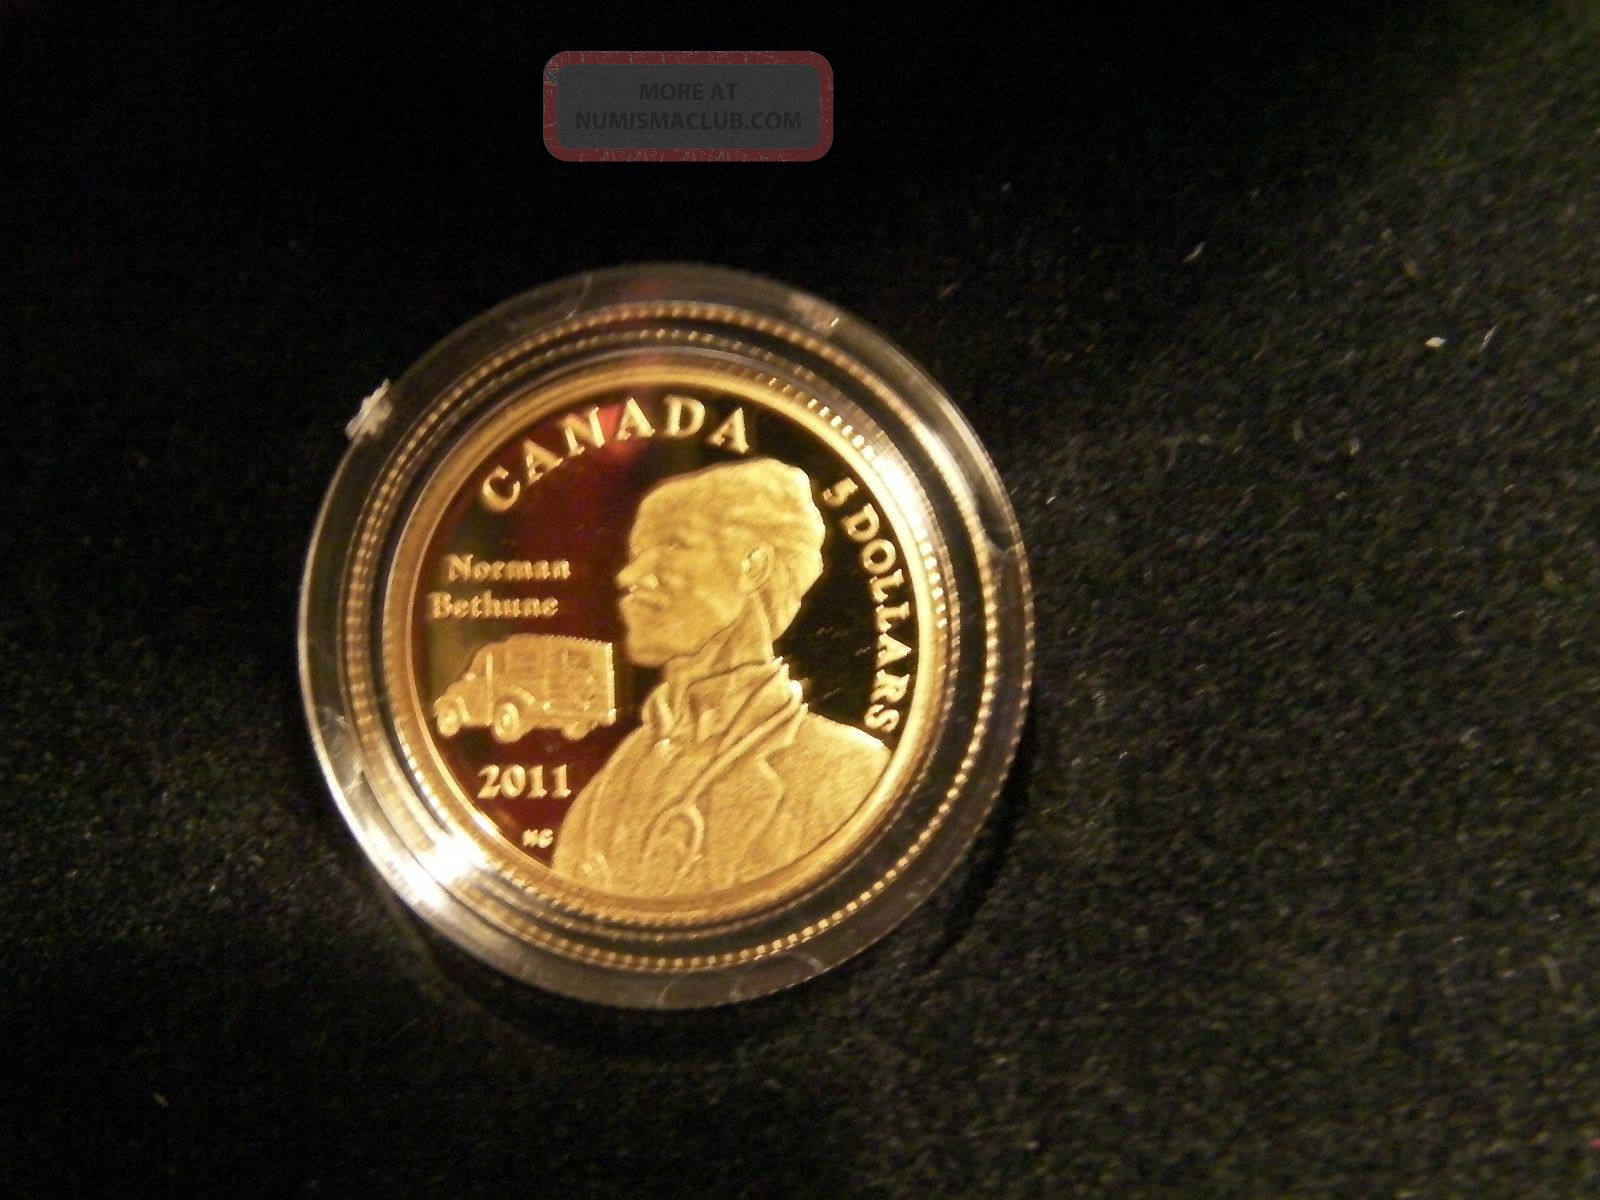 Canada 2011 Proof 1/10th Ounce Pure Hand Polished Gold Coin Dr. Norman Bethune